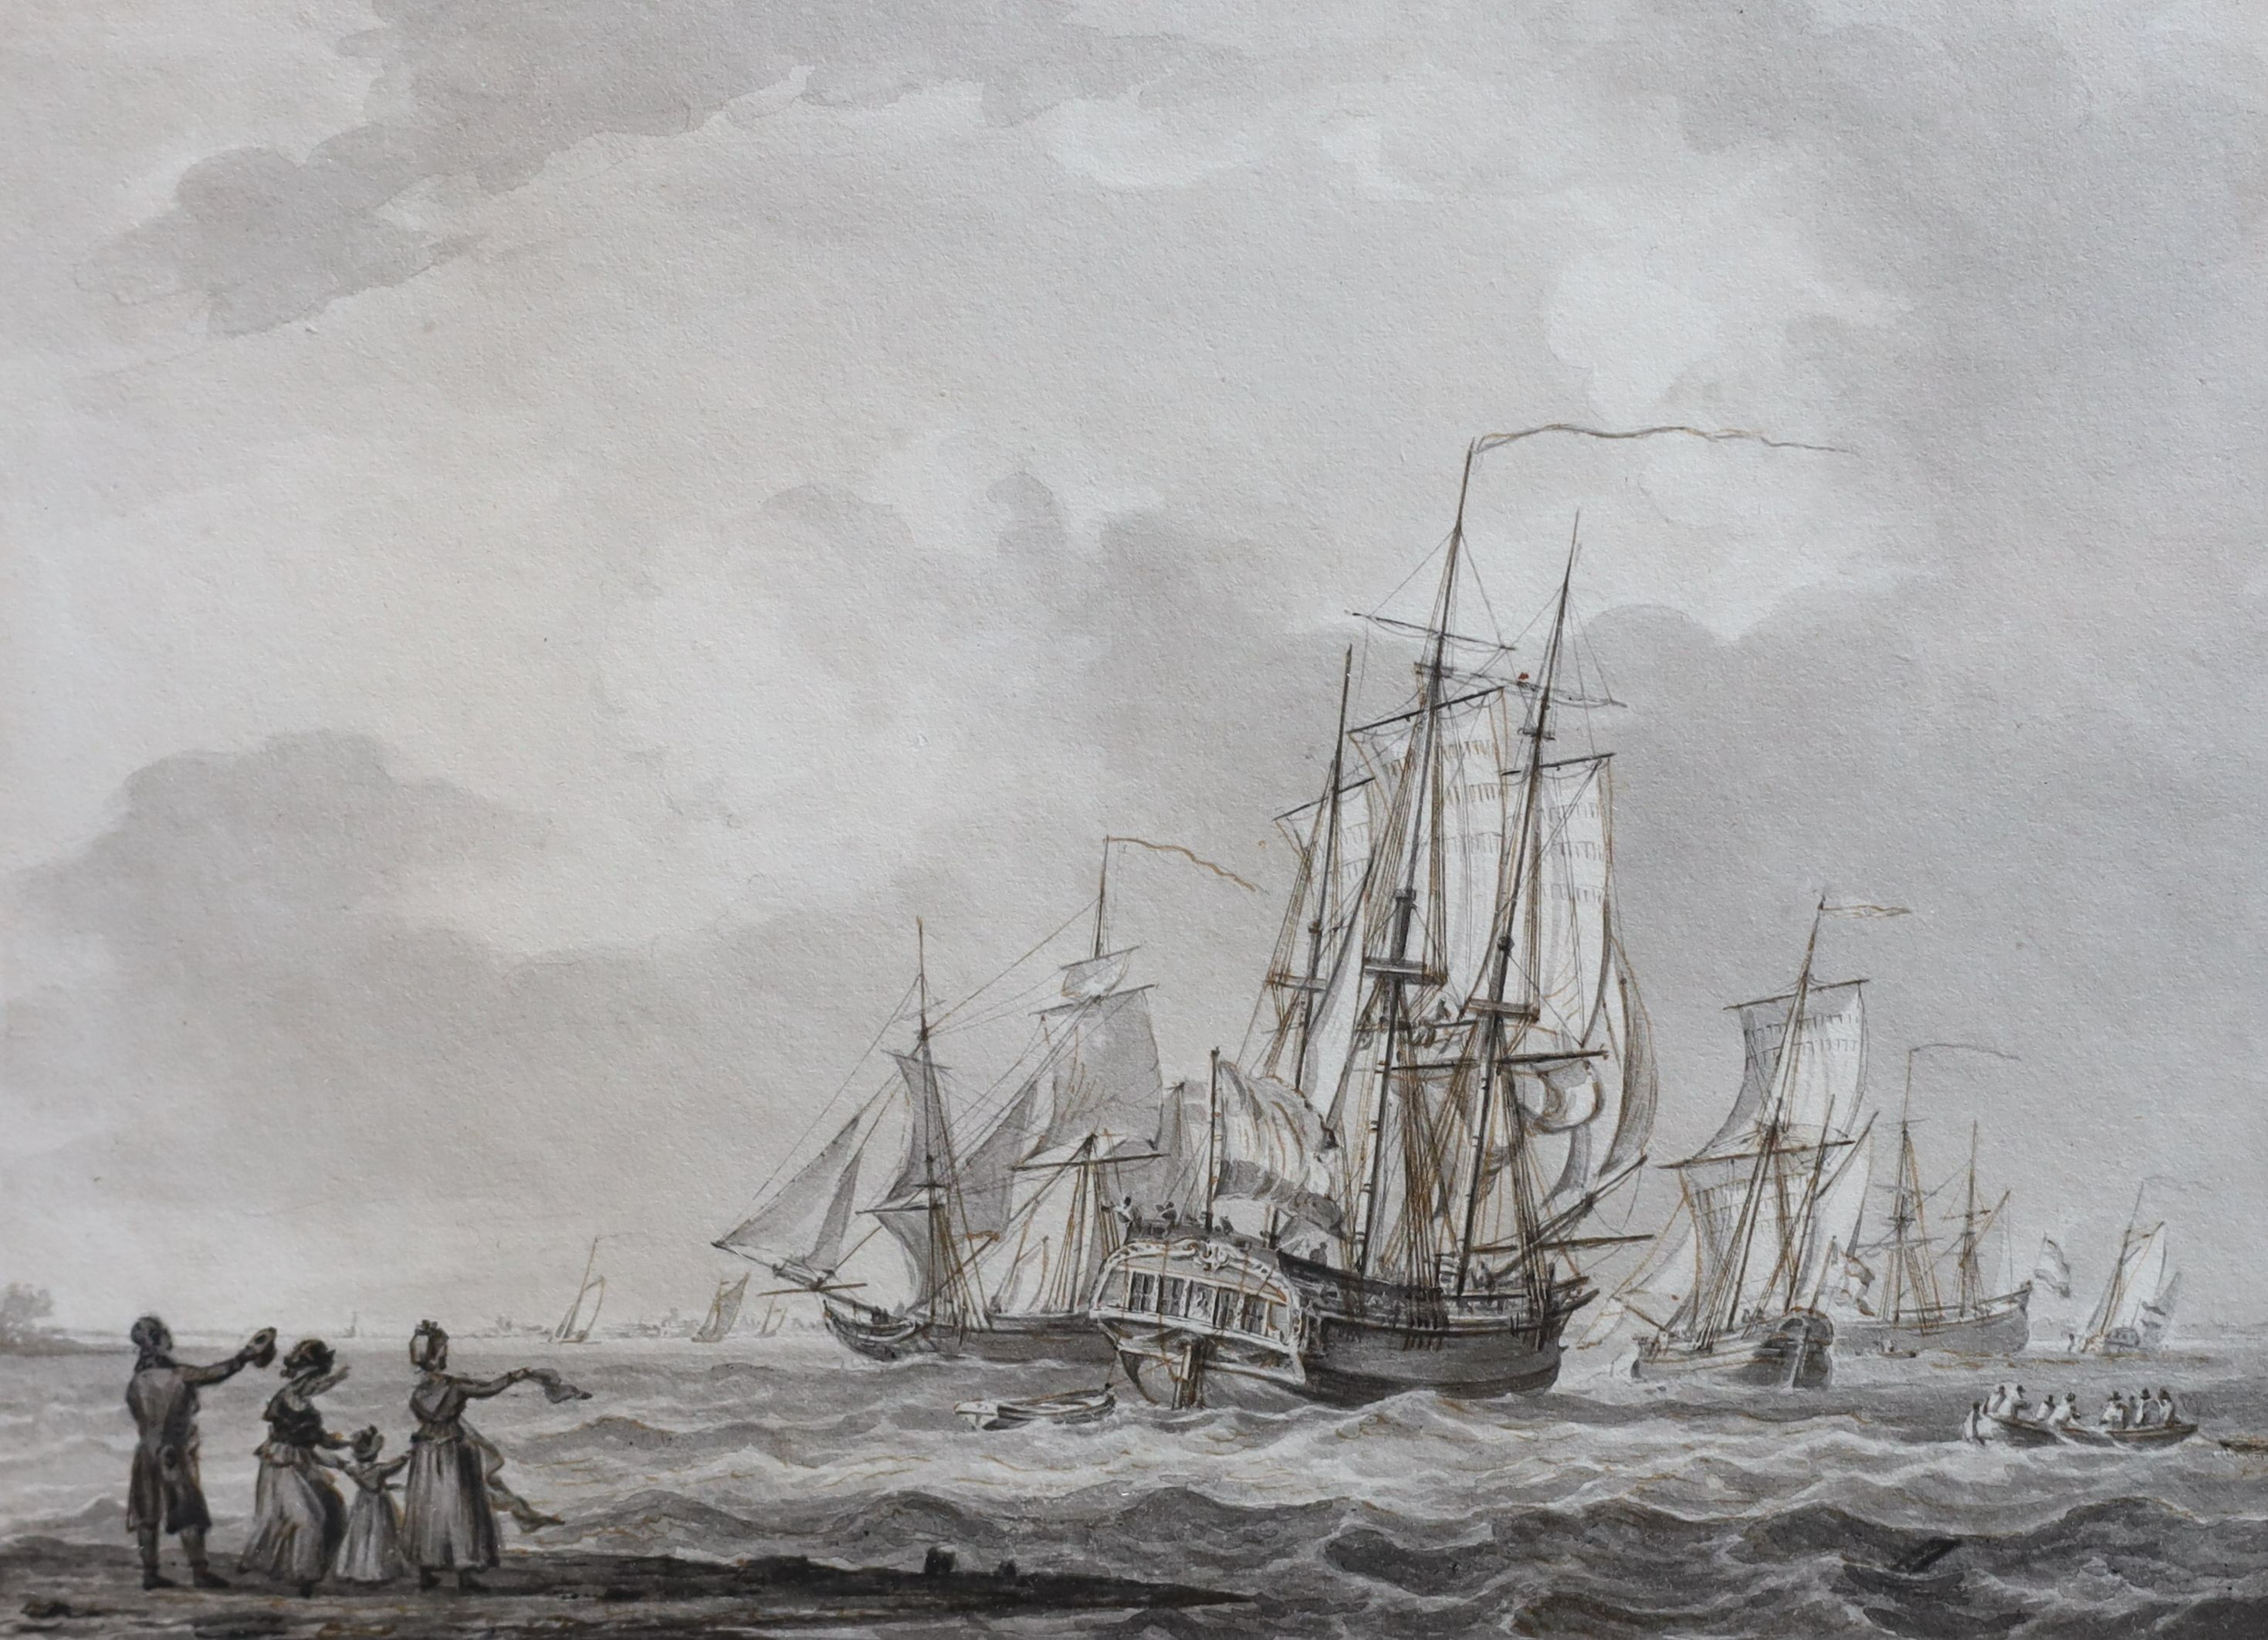 William Anderson (1757-1837), Shipping leaving harbour, figures on the shore waving farewell, ink and watercolour en grisaille, 15.5 x 21.5cm